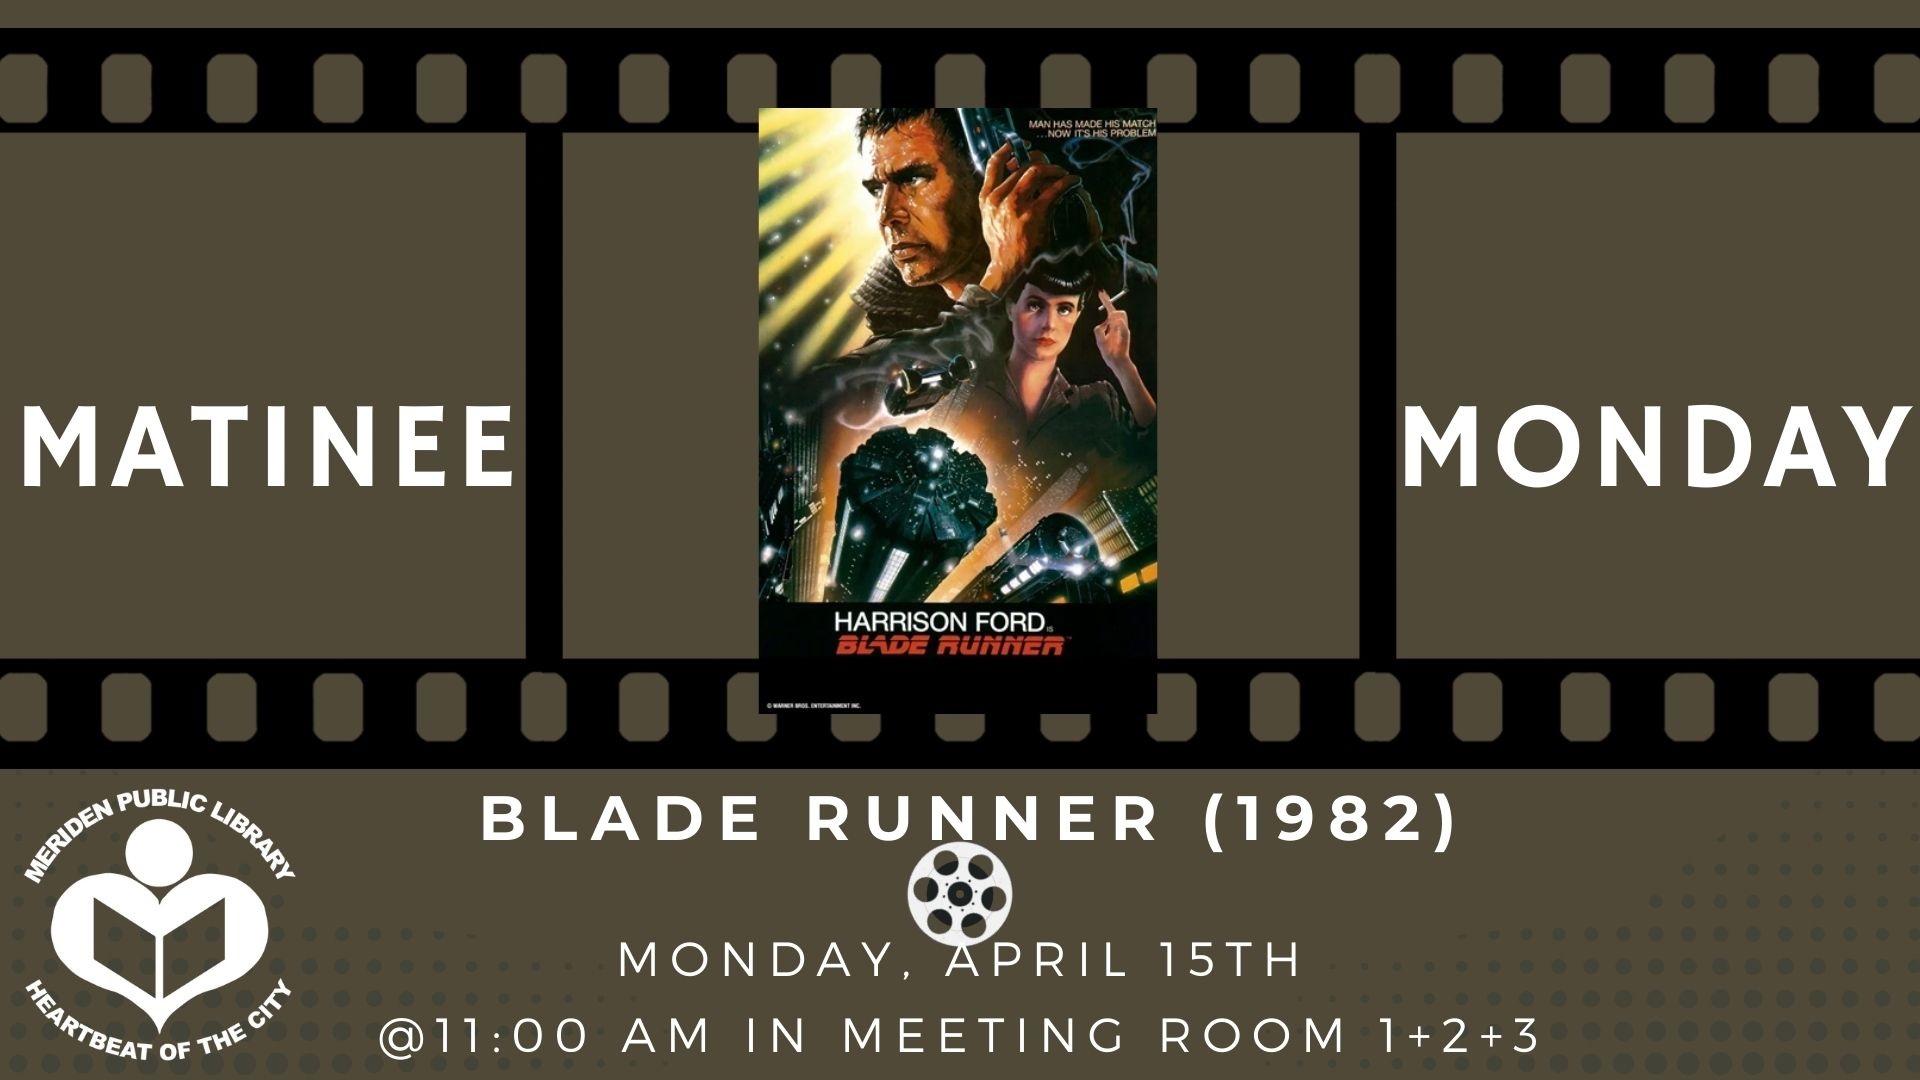 Blade Runner movie poster located between black and white film reel